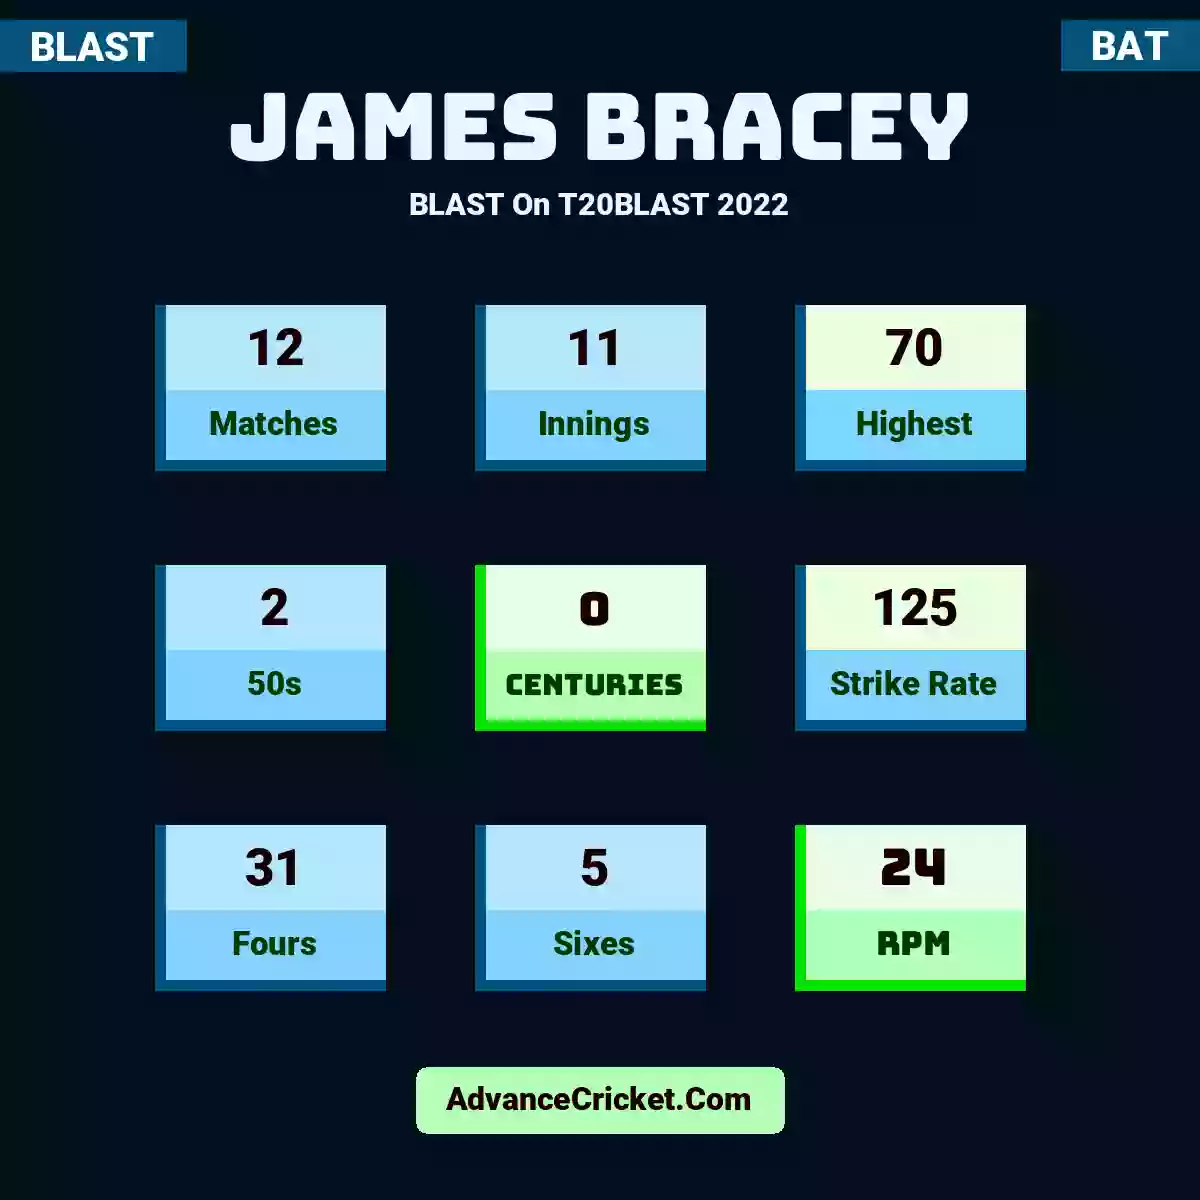 James Bracey BLAST  On T20BLAST 2022, James Bracey played 12 matches, scored 70 runs as highest, 2 half-centuries, and 0 centuries, with a strike rate of 125. J.Bracey hit 31 fours and 5 sixes, with an RPM of 24.